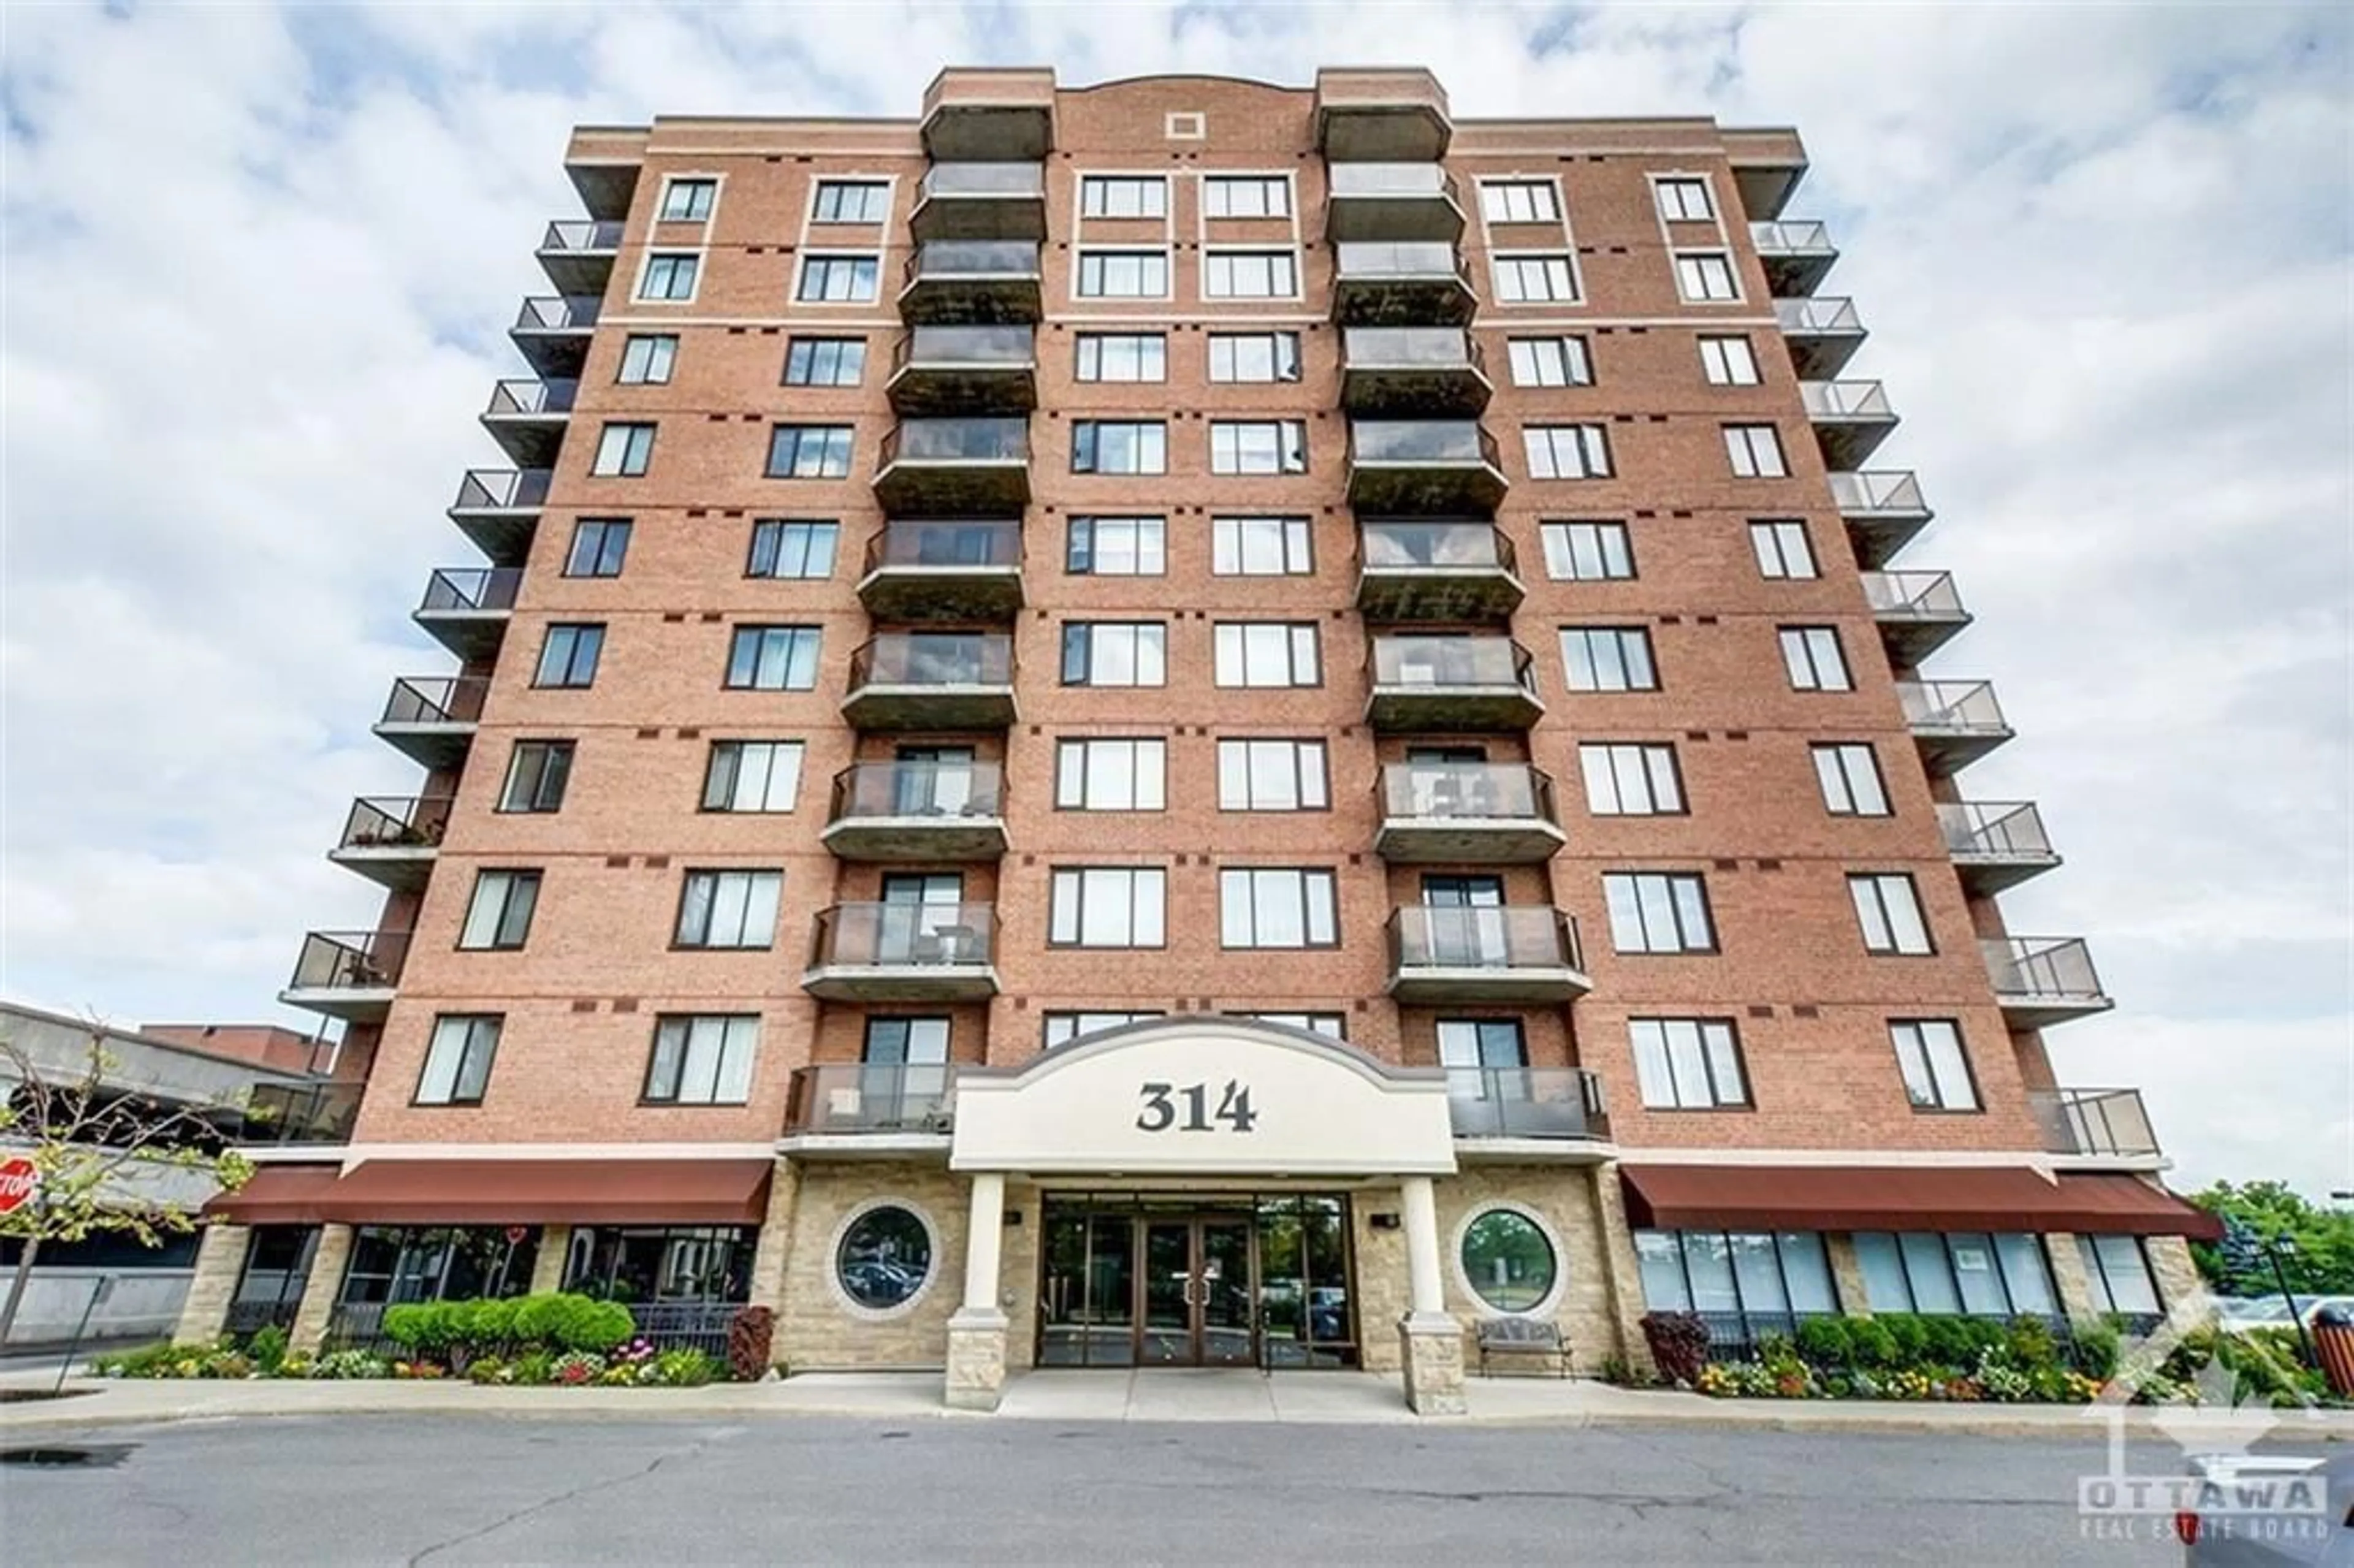 A pic from exterior of the house or condo for 314 CENTRAL PARK Dr #811, Ottawa Ontario K2C 4G4